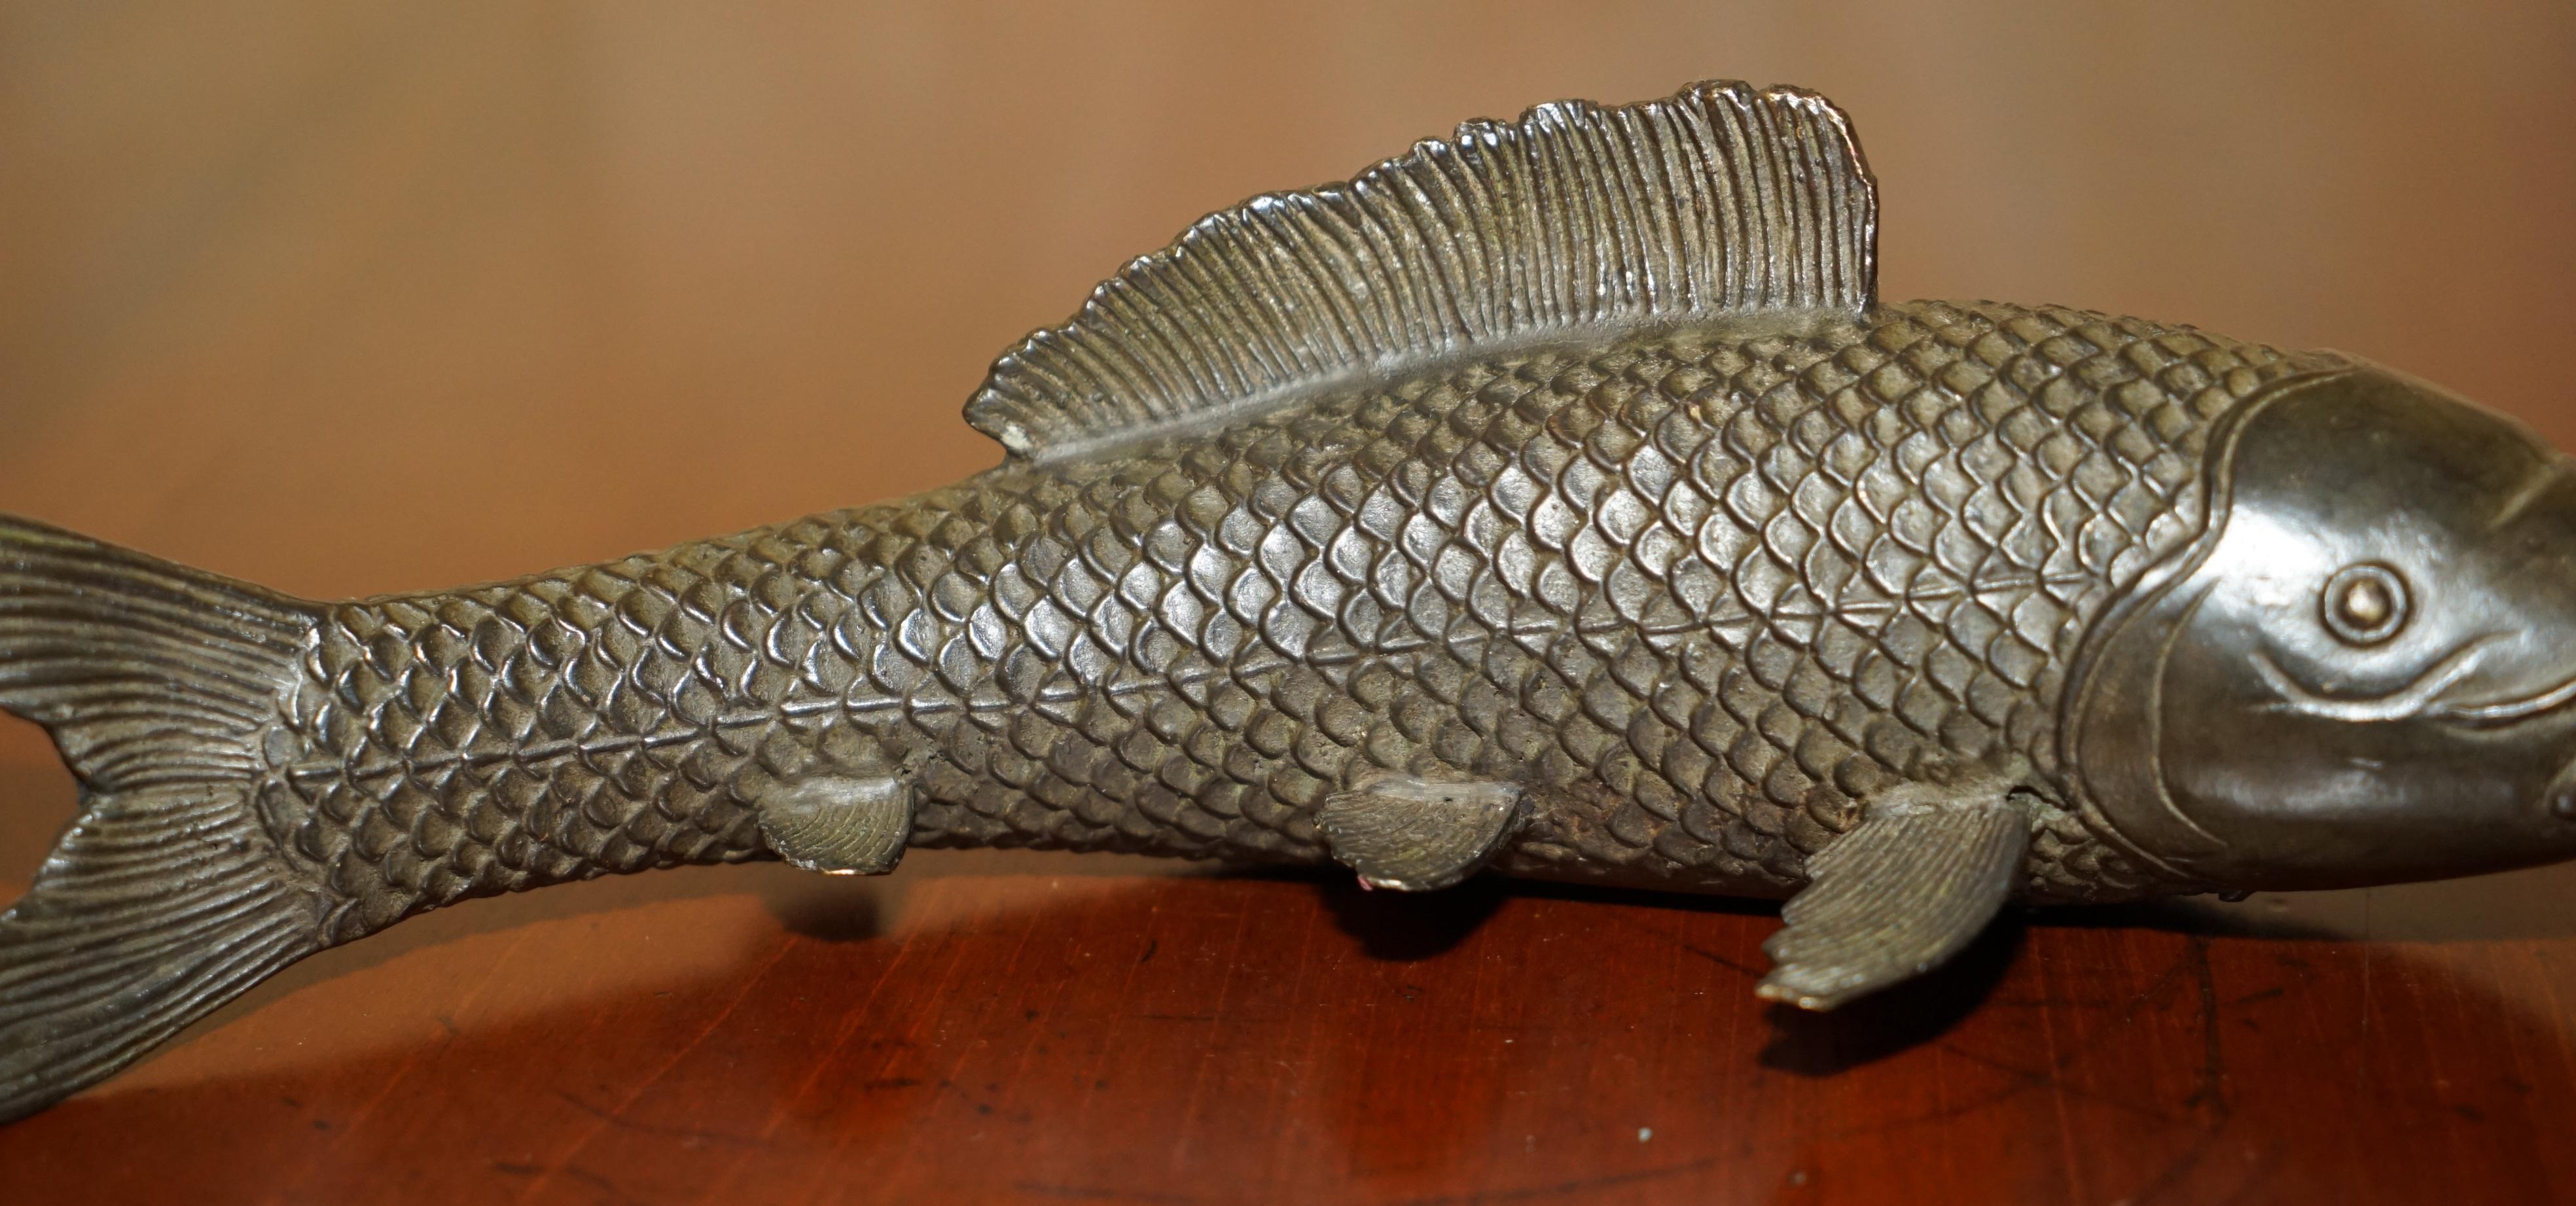 Hand-Crafted ANTIQUE SOLiD BRONZE JAPANESE KOI CARP STATUE OF A WONDERFULLY ELEGANT FISH For Sale